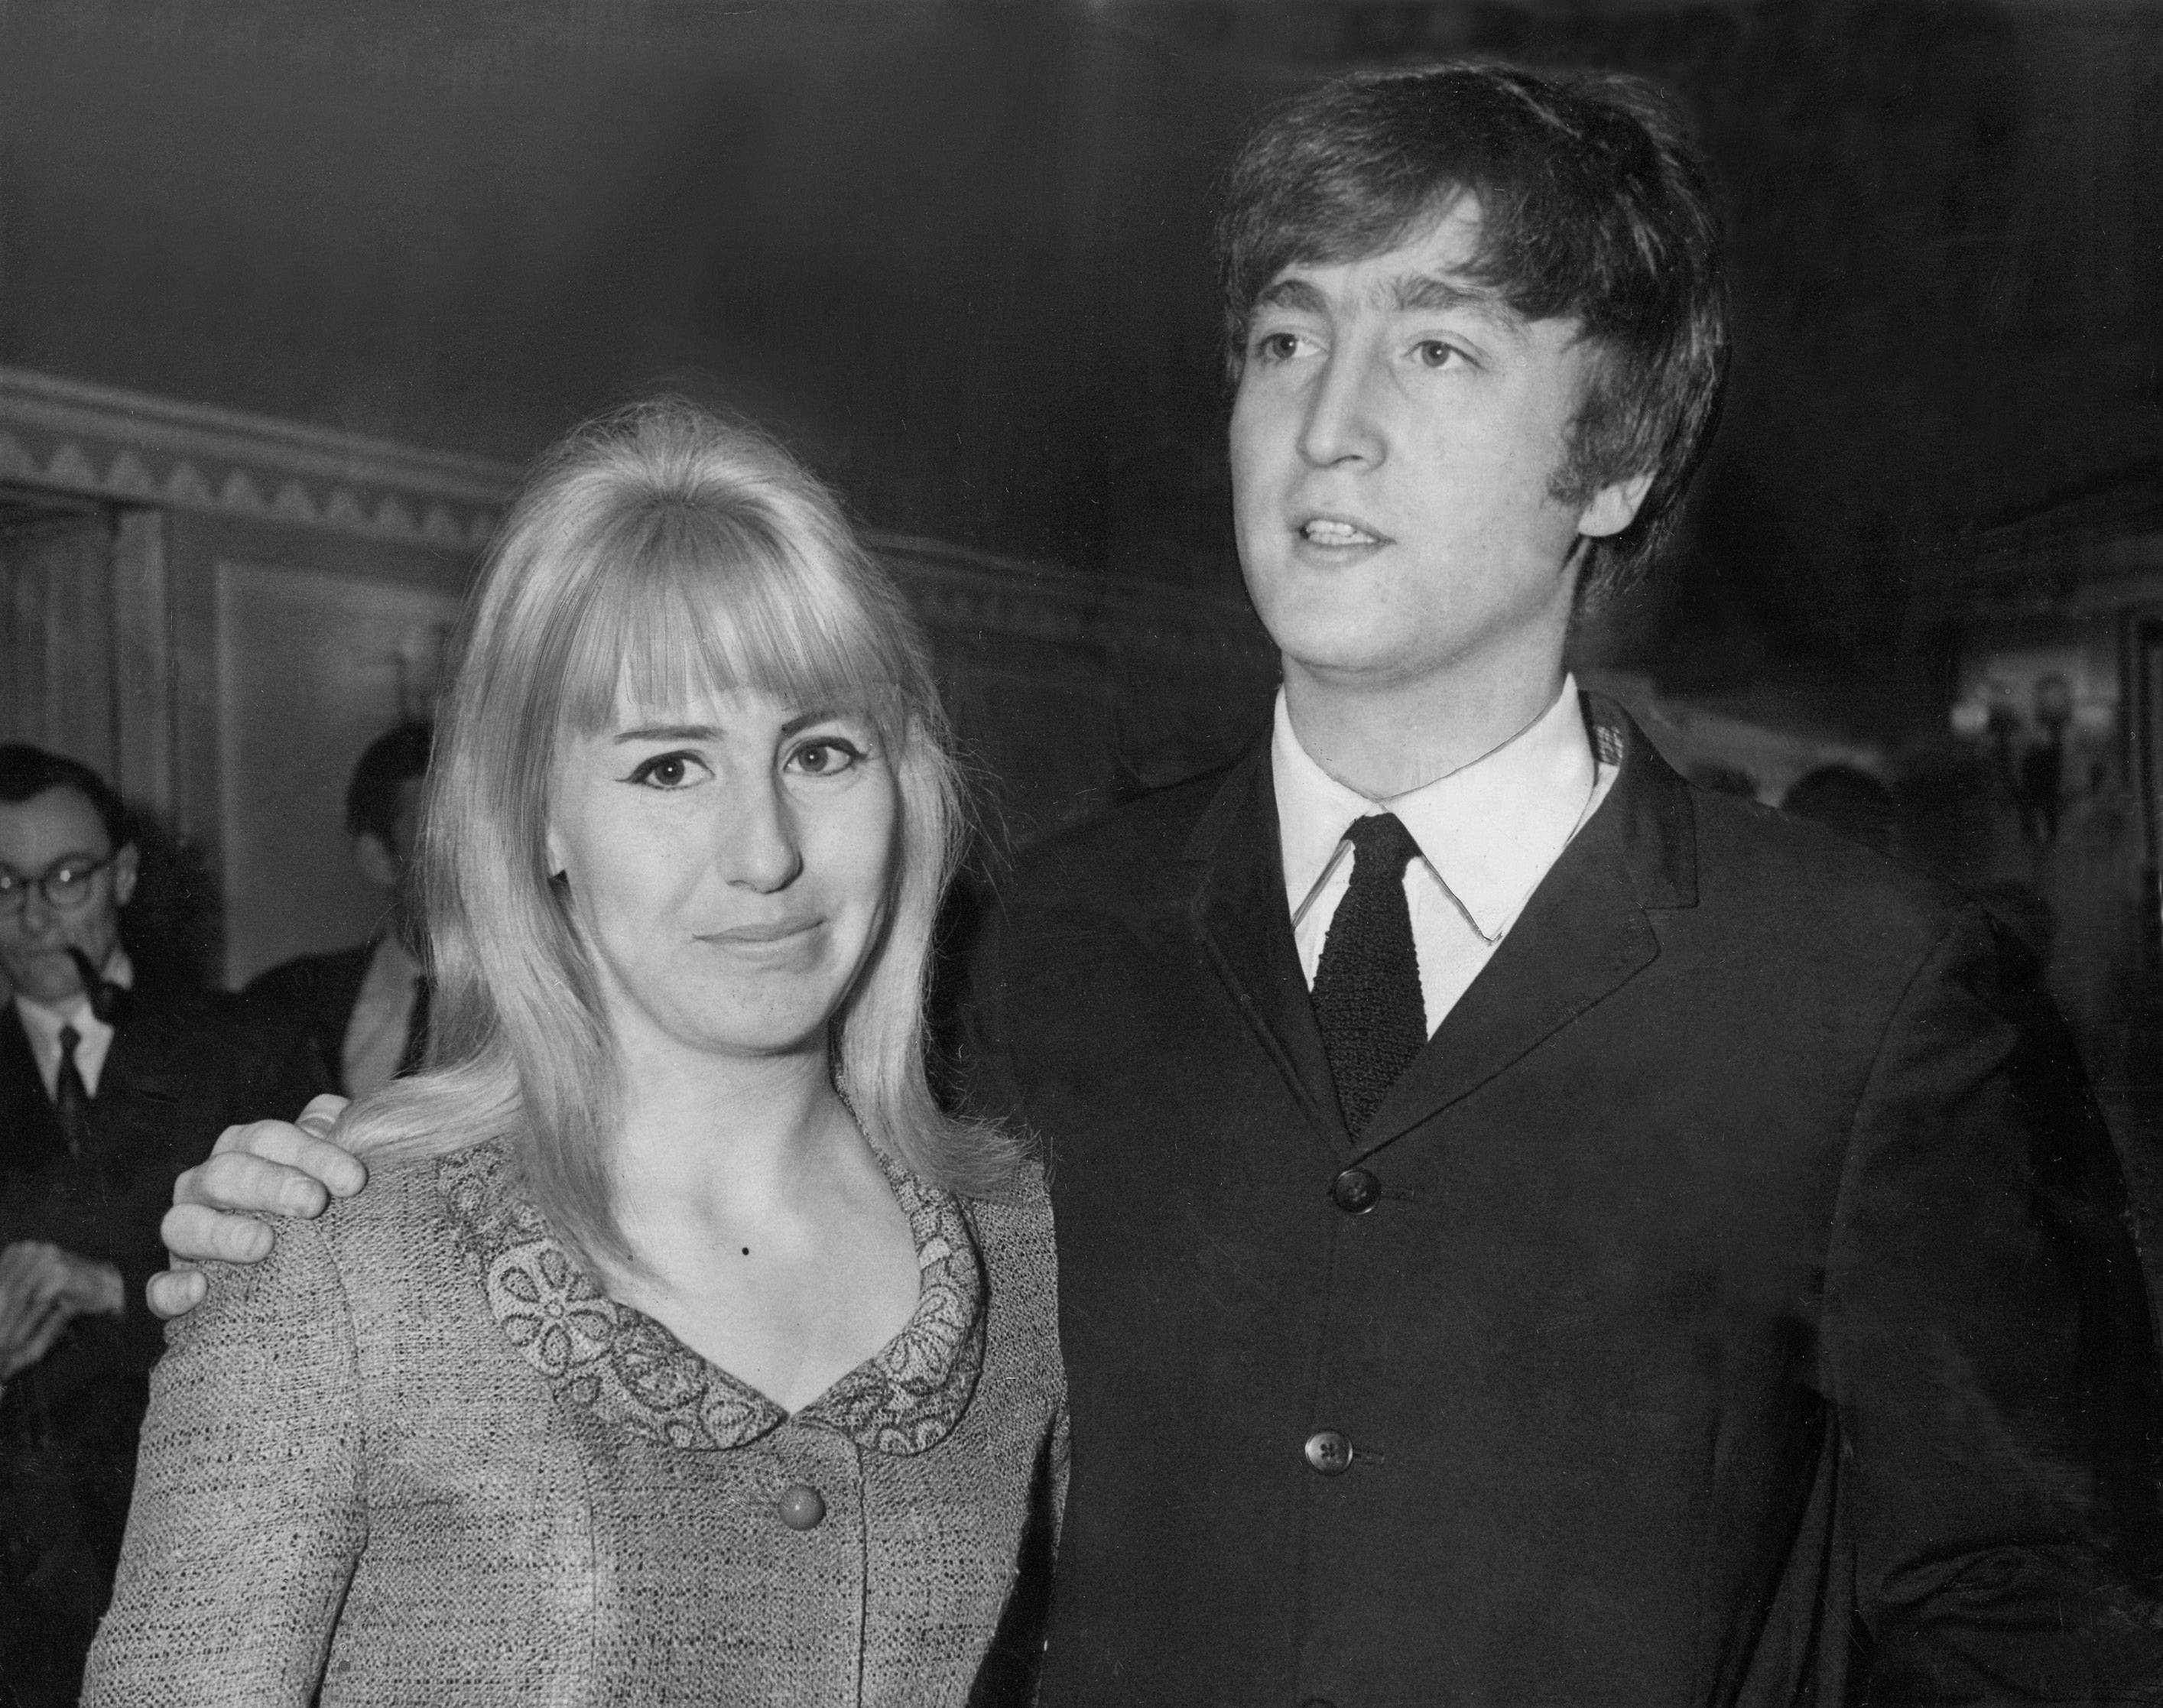 Did Cynthia Lennon Sleep With John Lennons Friend Magic Alex After Finding Him With Yoko Ono? image